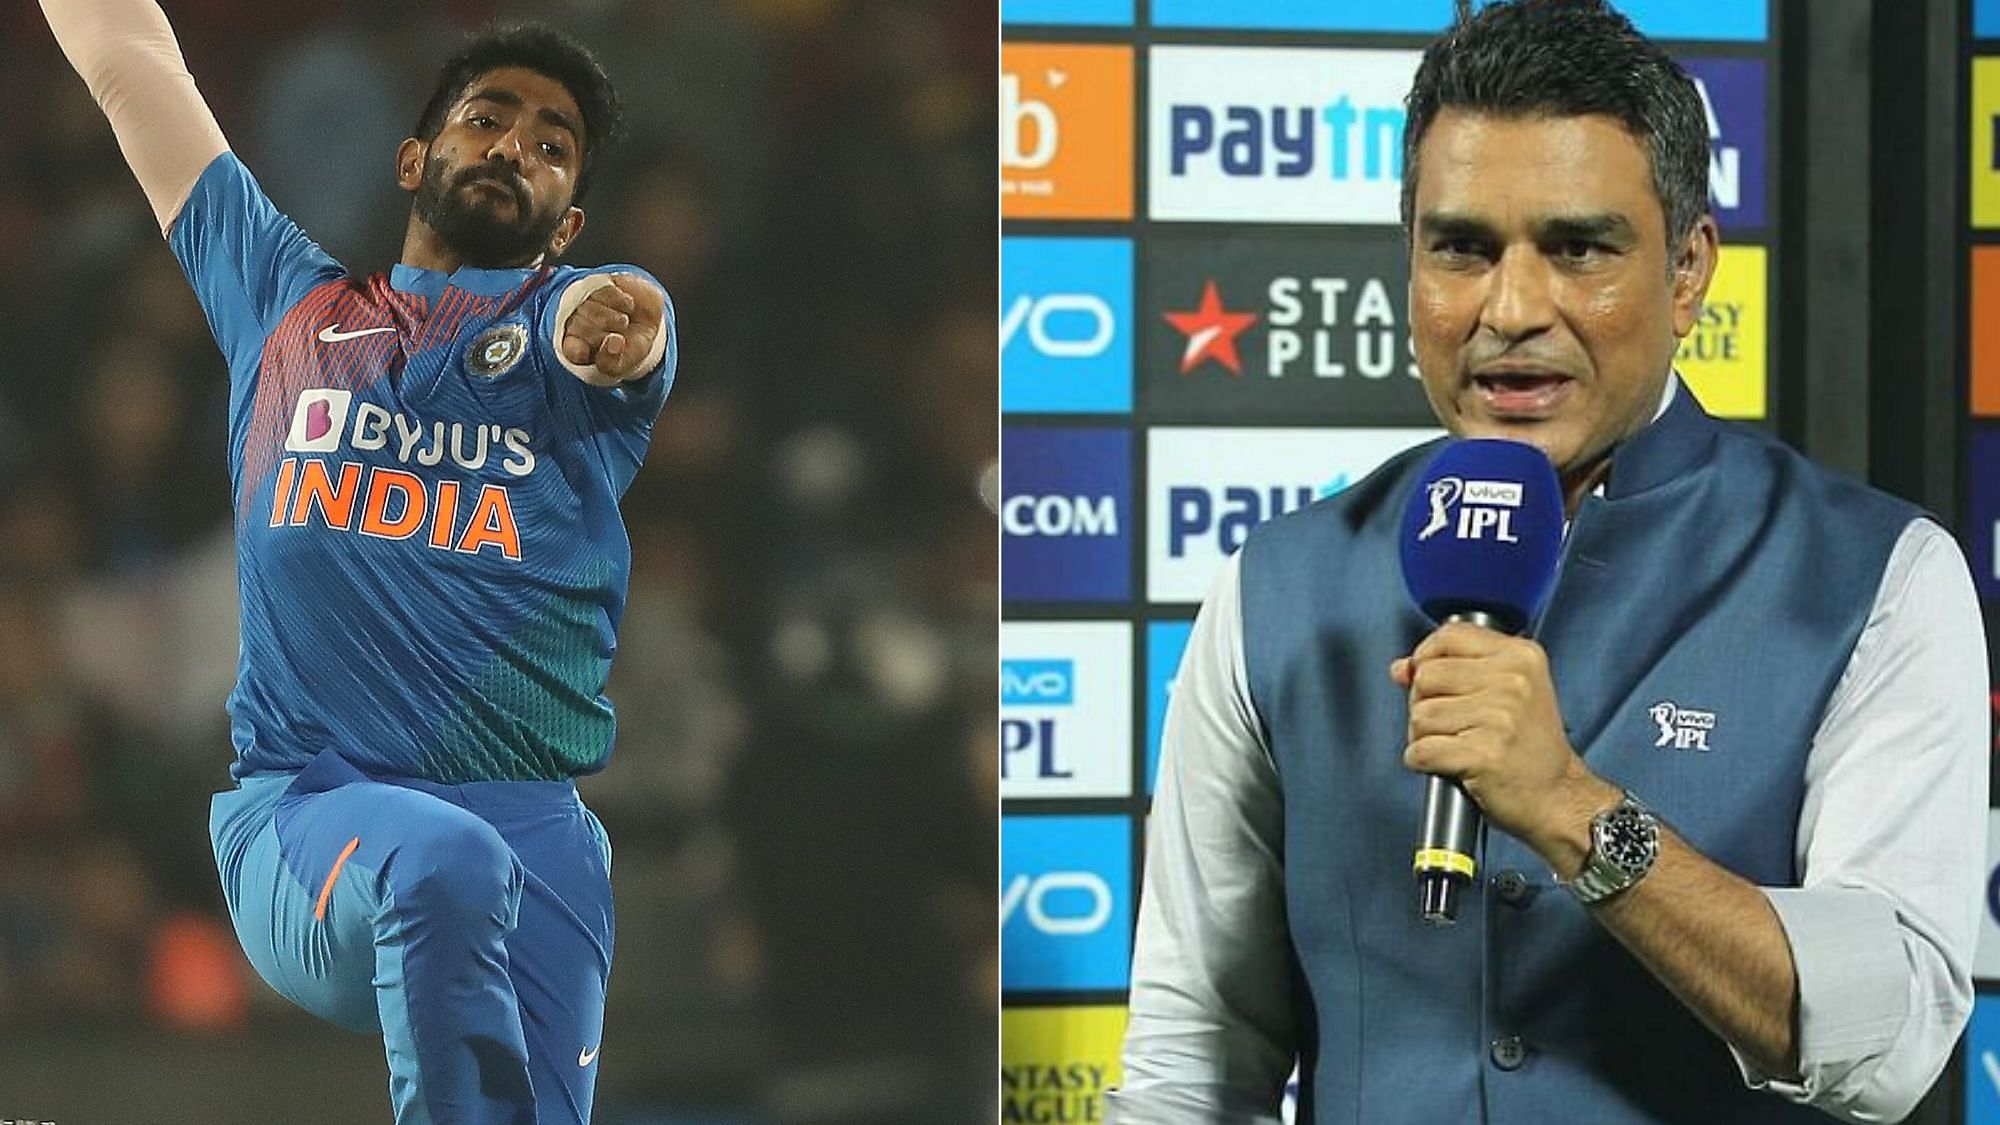 Former India batsman-turned commentator Sanjay Manjrekar was trolled on social media for trying to advise Jasprit Bumrah on how to bowl, after the third T20I against New Zealand in Hamilton on Wednesday, 29 January.